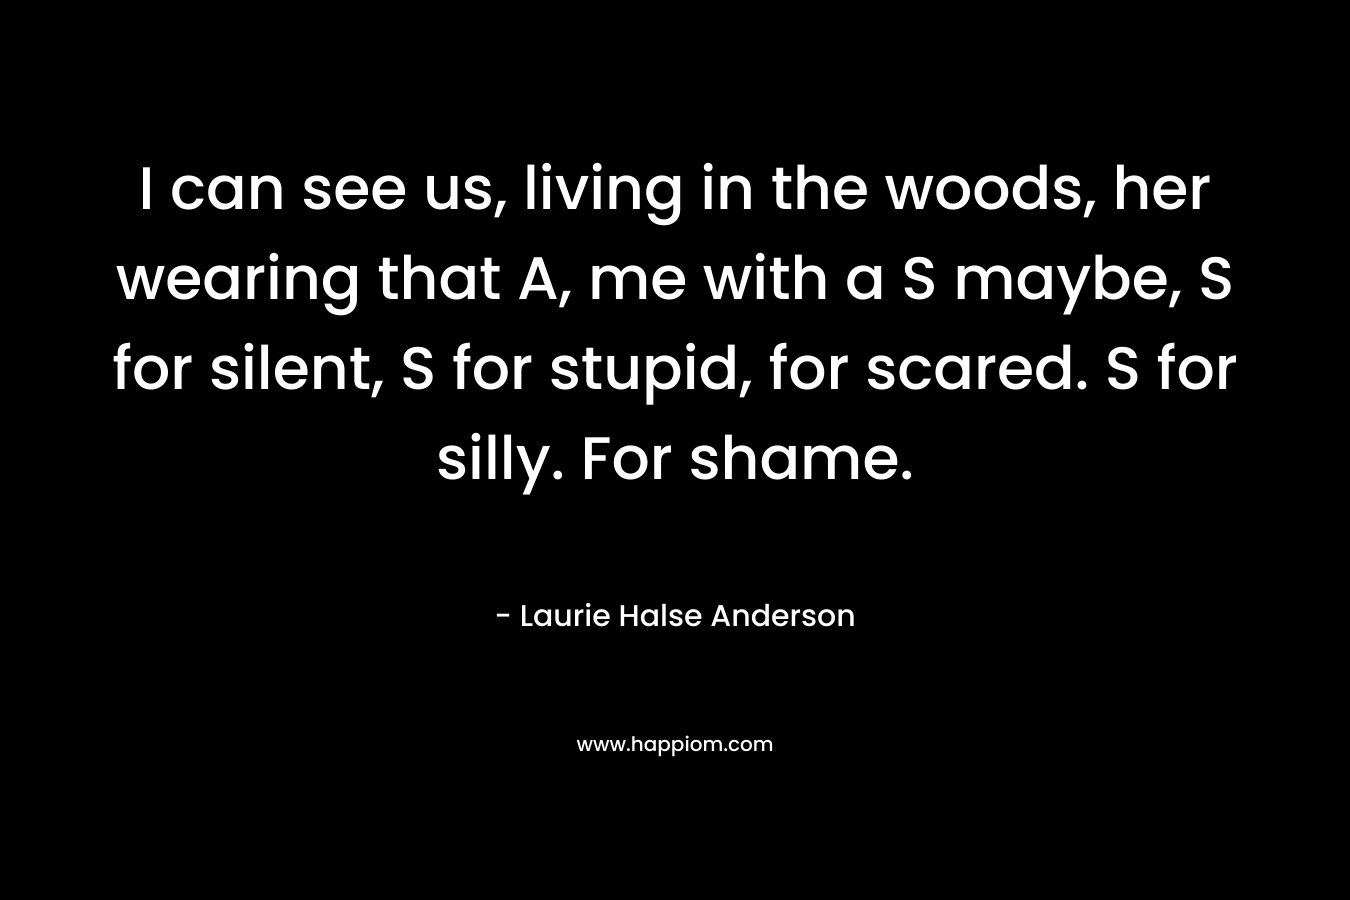 I can see us, living in the woods, her wearing that A, me with a S maybe, S for silent, S for stupid, for scared. S for silly. For shame. – Laurie Halse Anderson